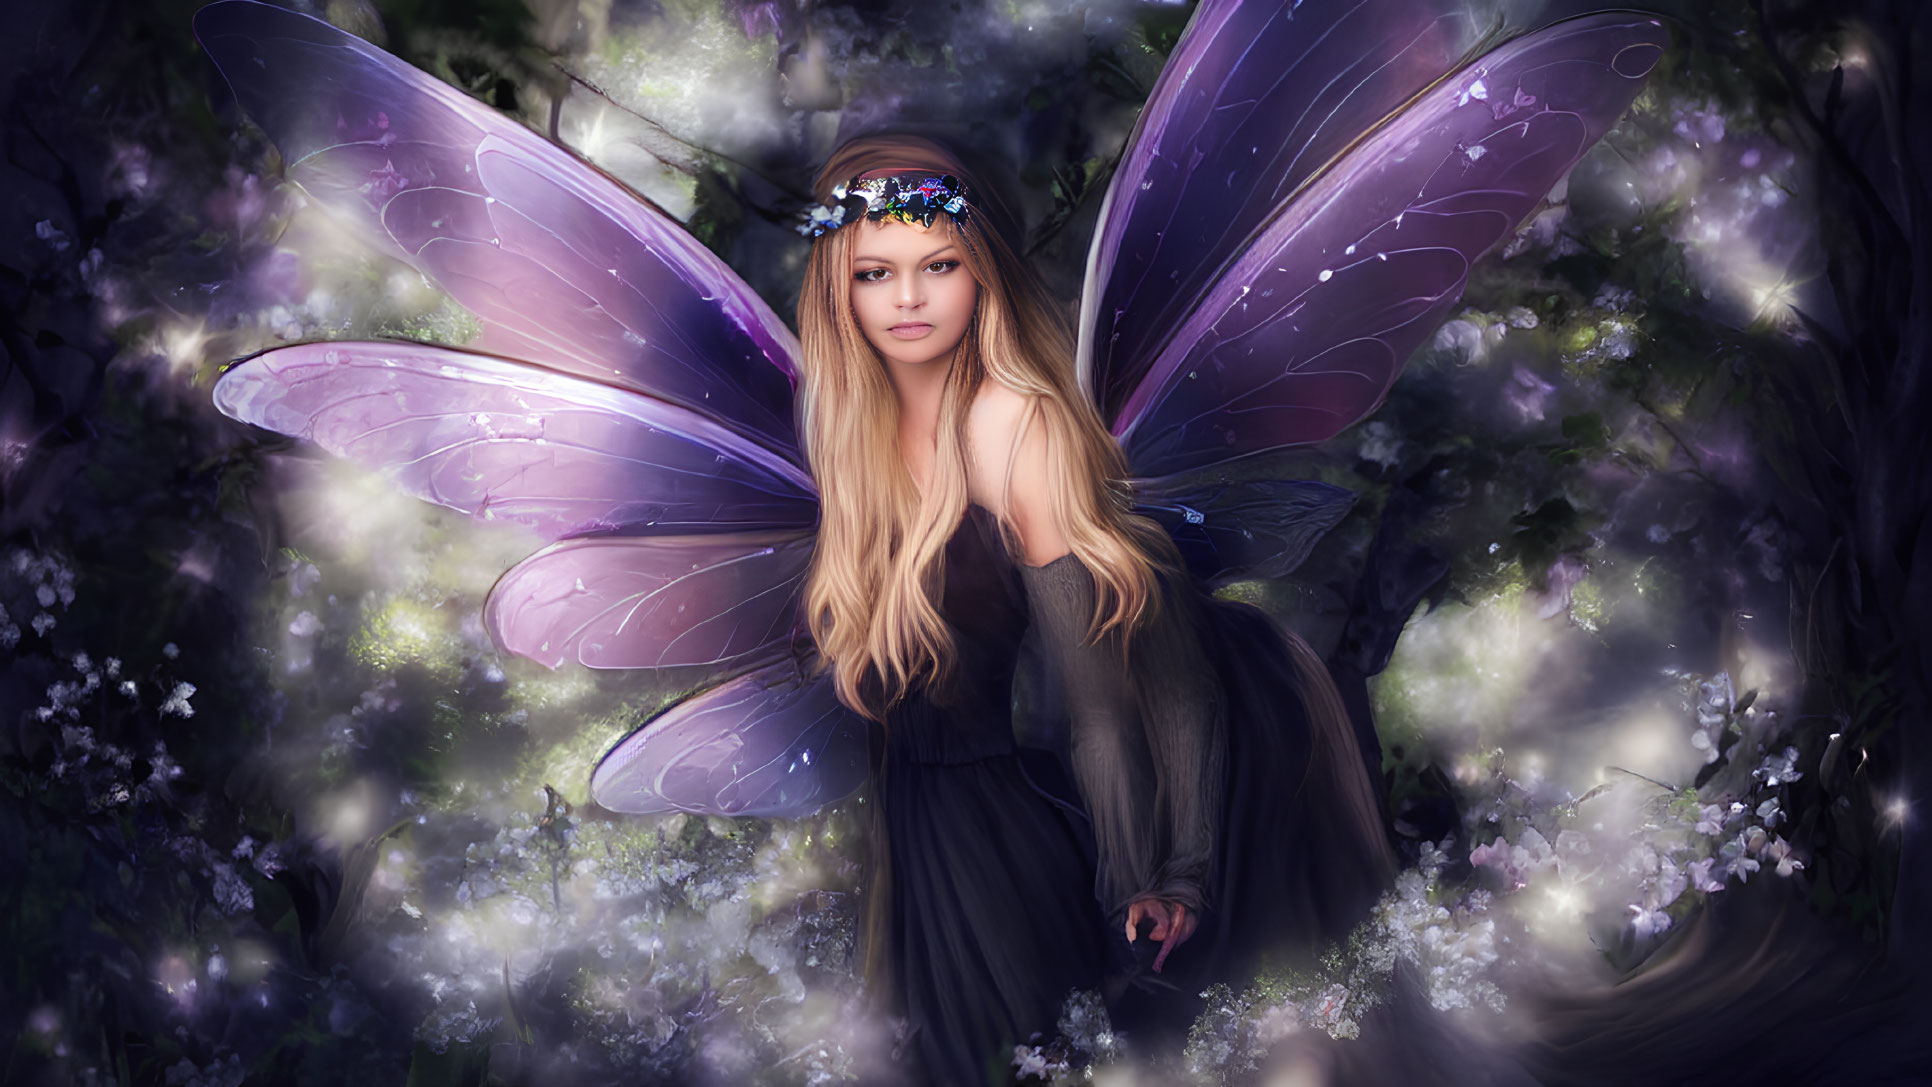 Fairy in mystical forest with purple wings and blooming flowers